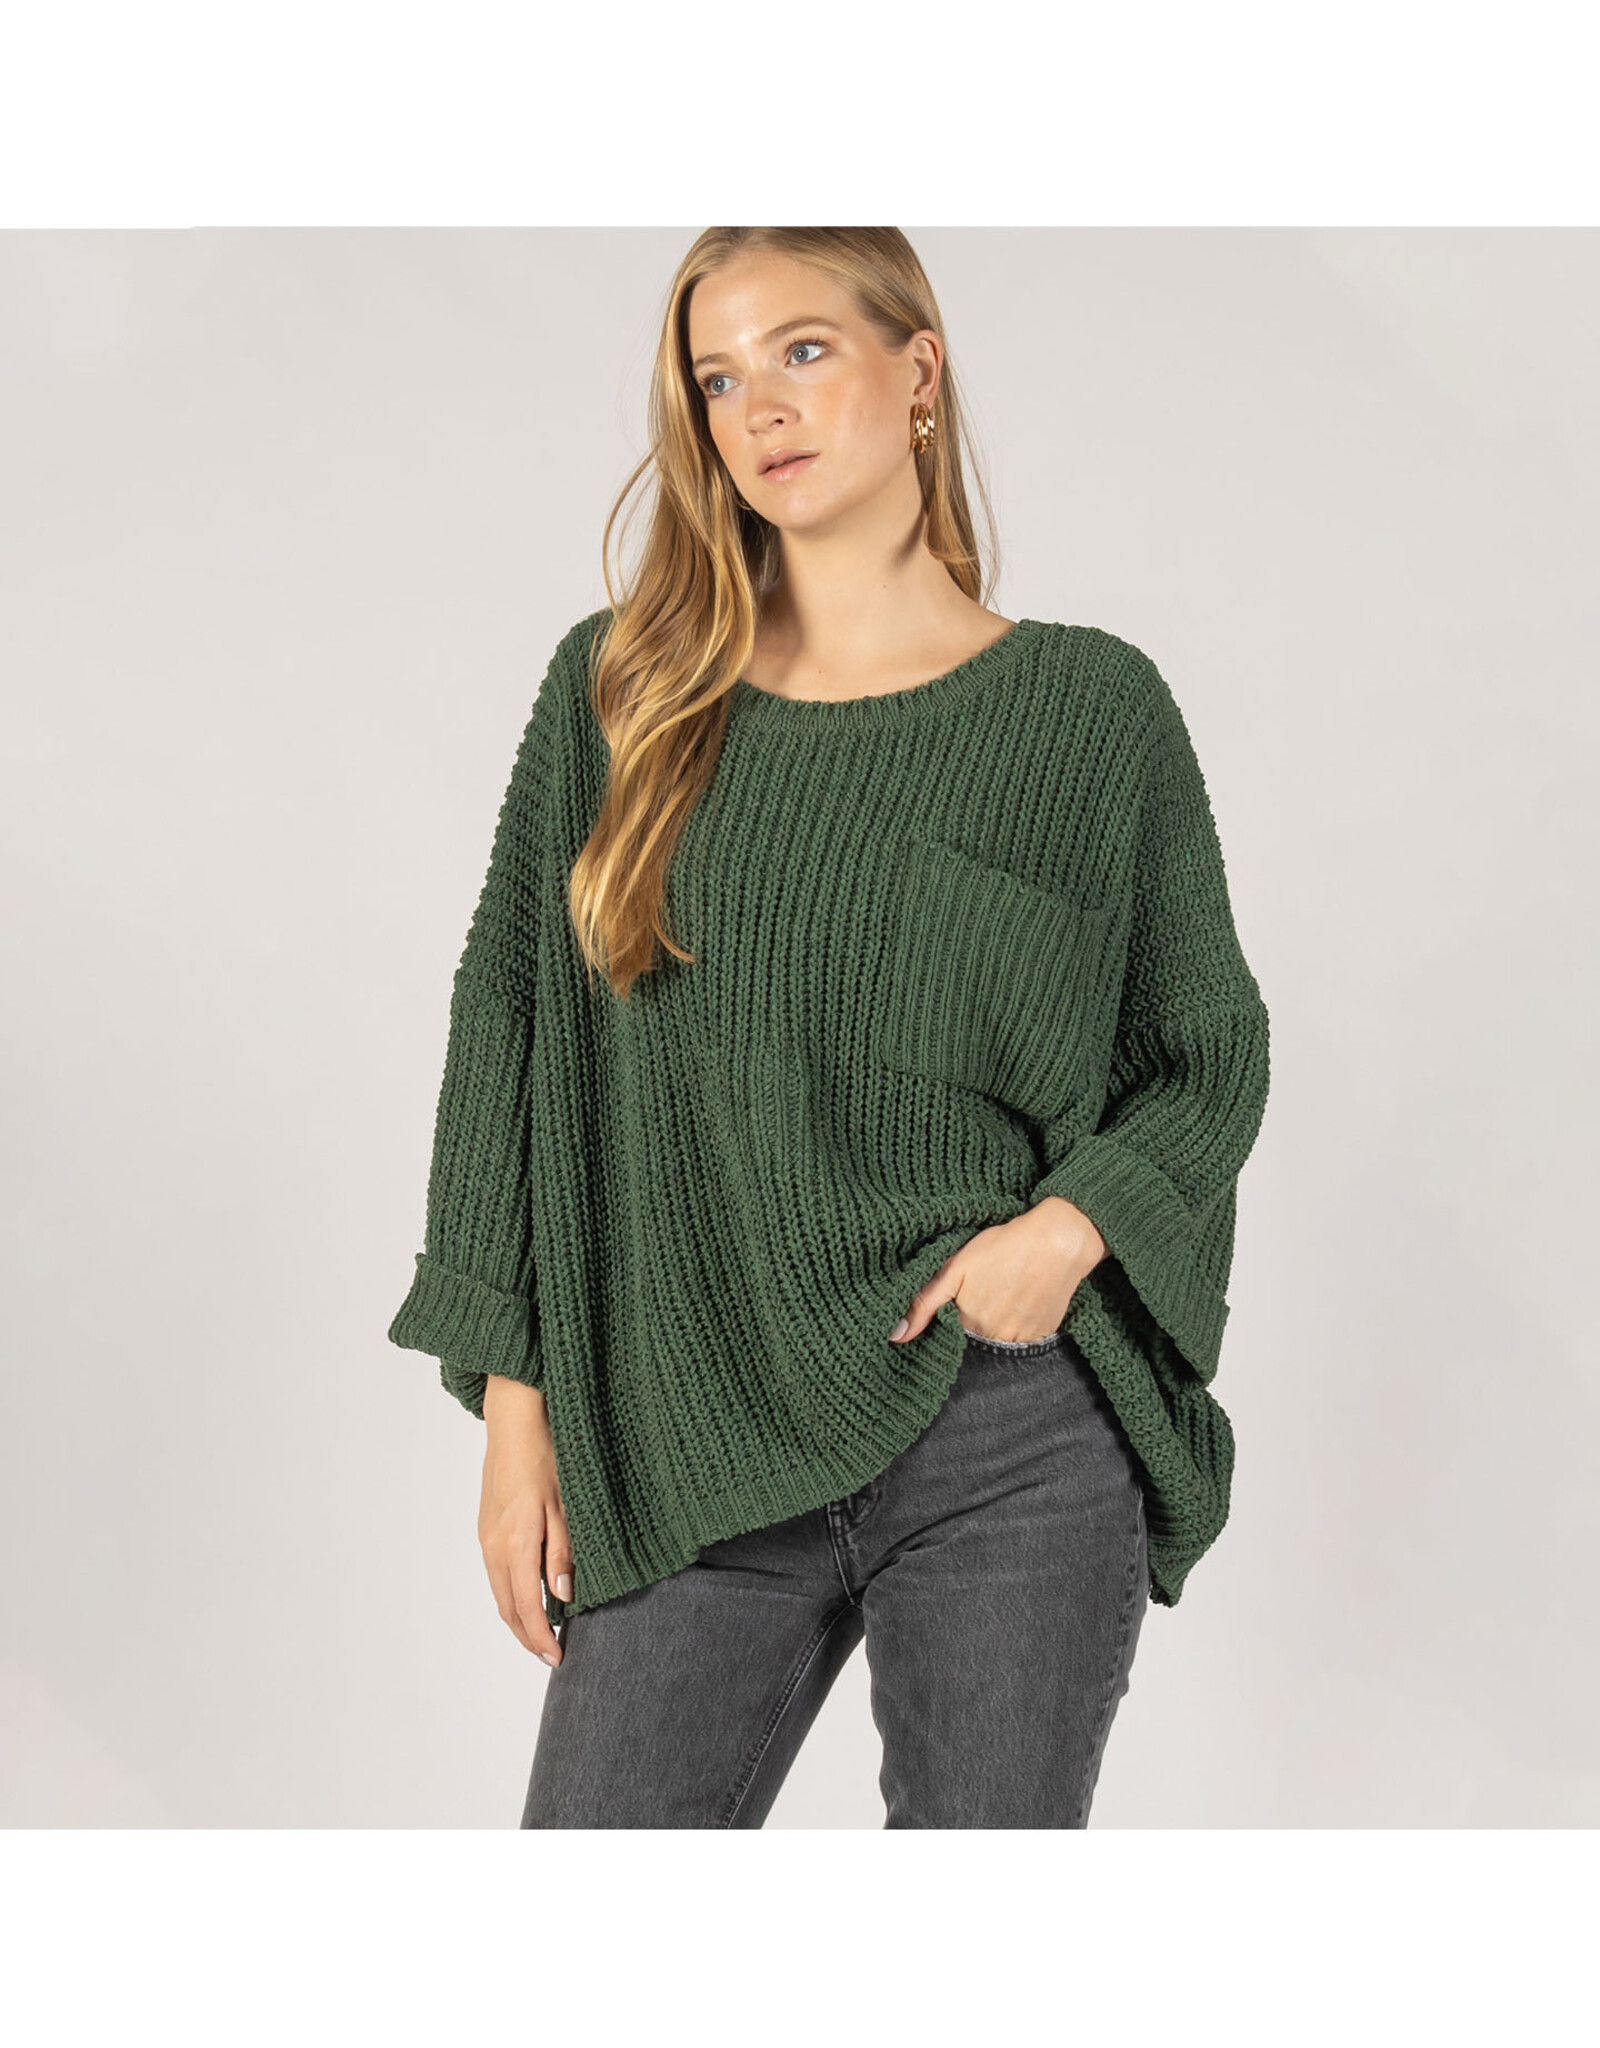 Chenille Oversized Sweater - One Size (Forest Green)